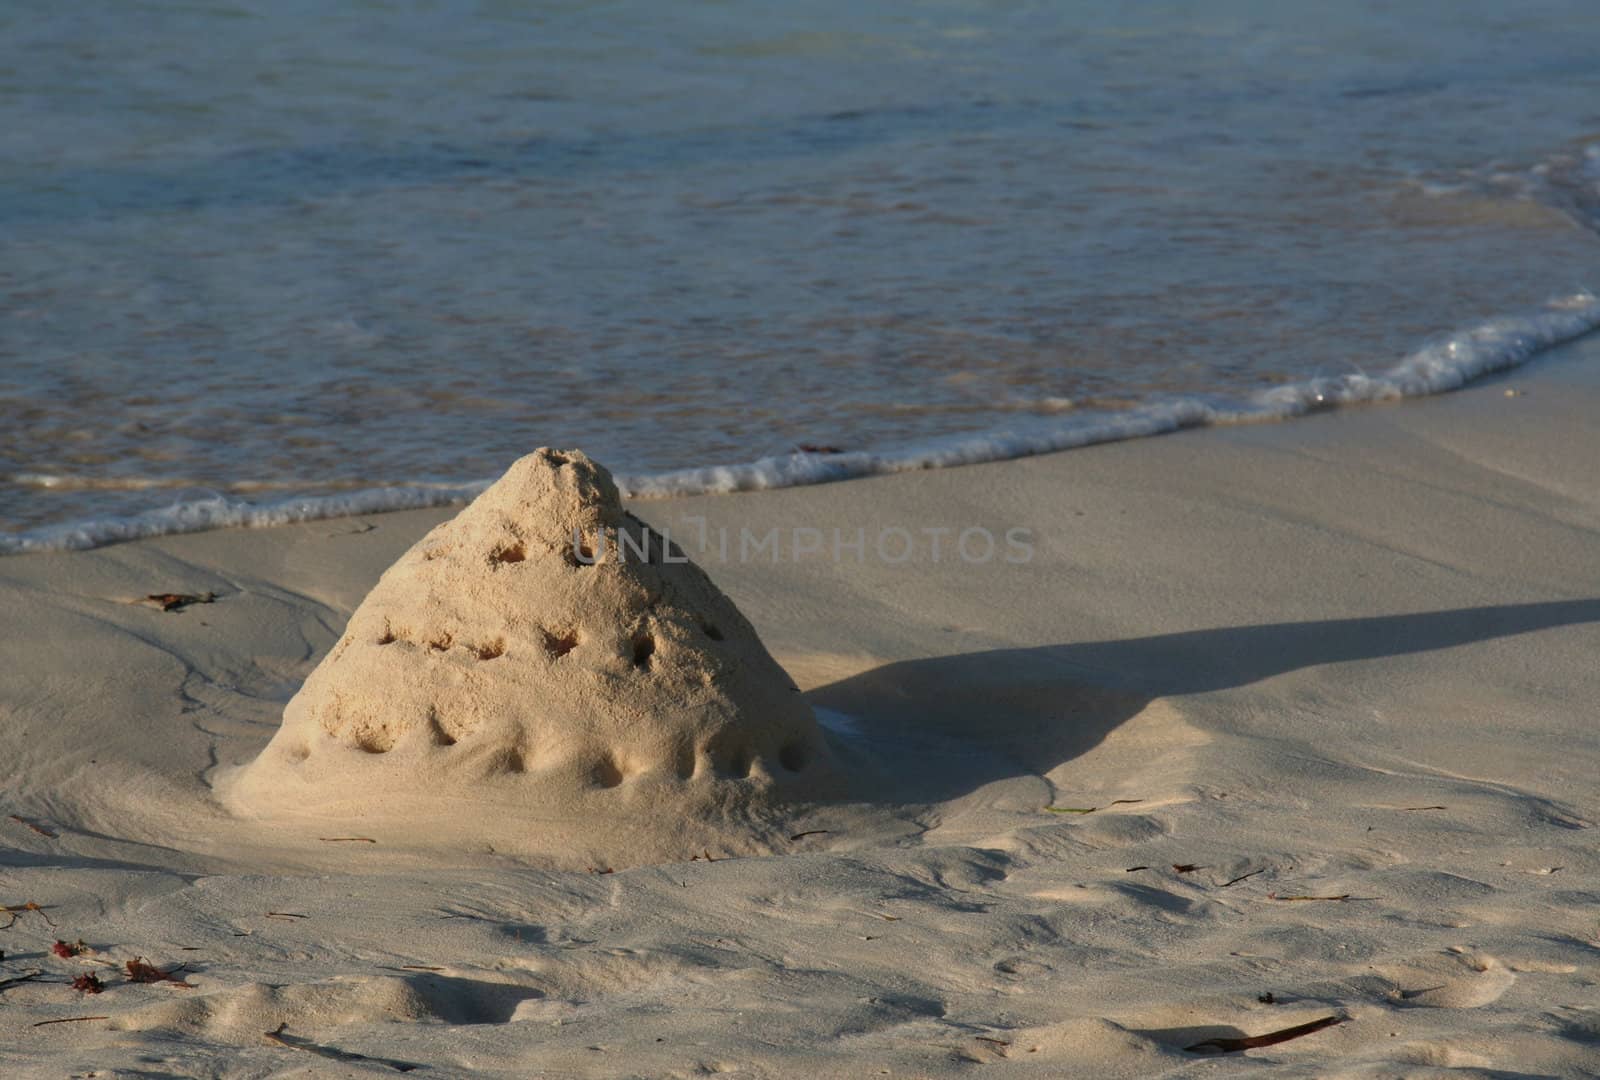 A sand castle slowly being washed away by the tide.